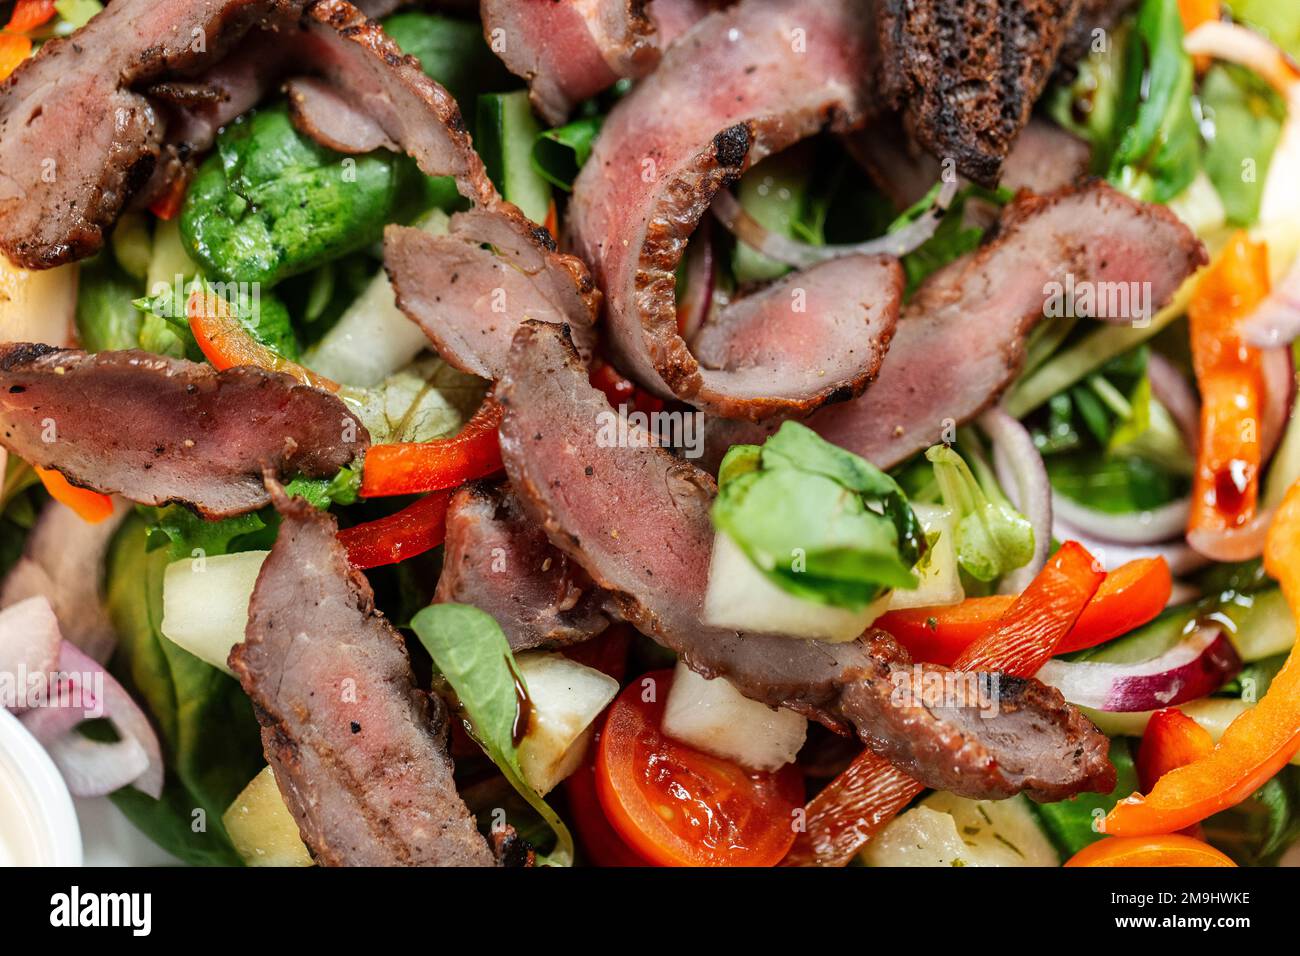 close up of meat with vegetable salad Stock Photo